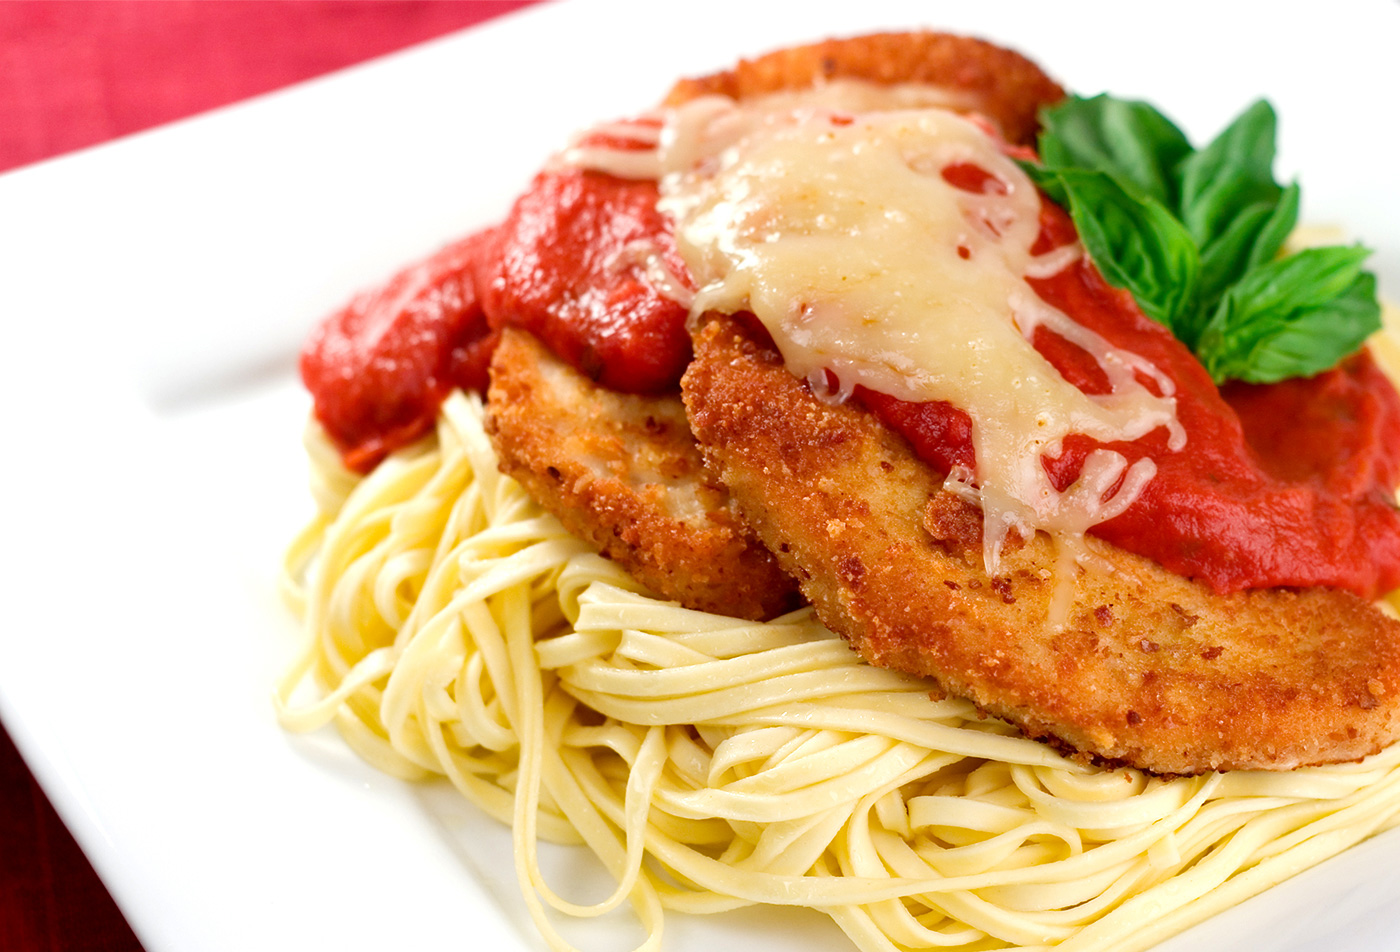 gold 'n soft recipe turkey cutlets with angel hair pasta